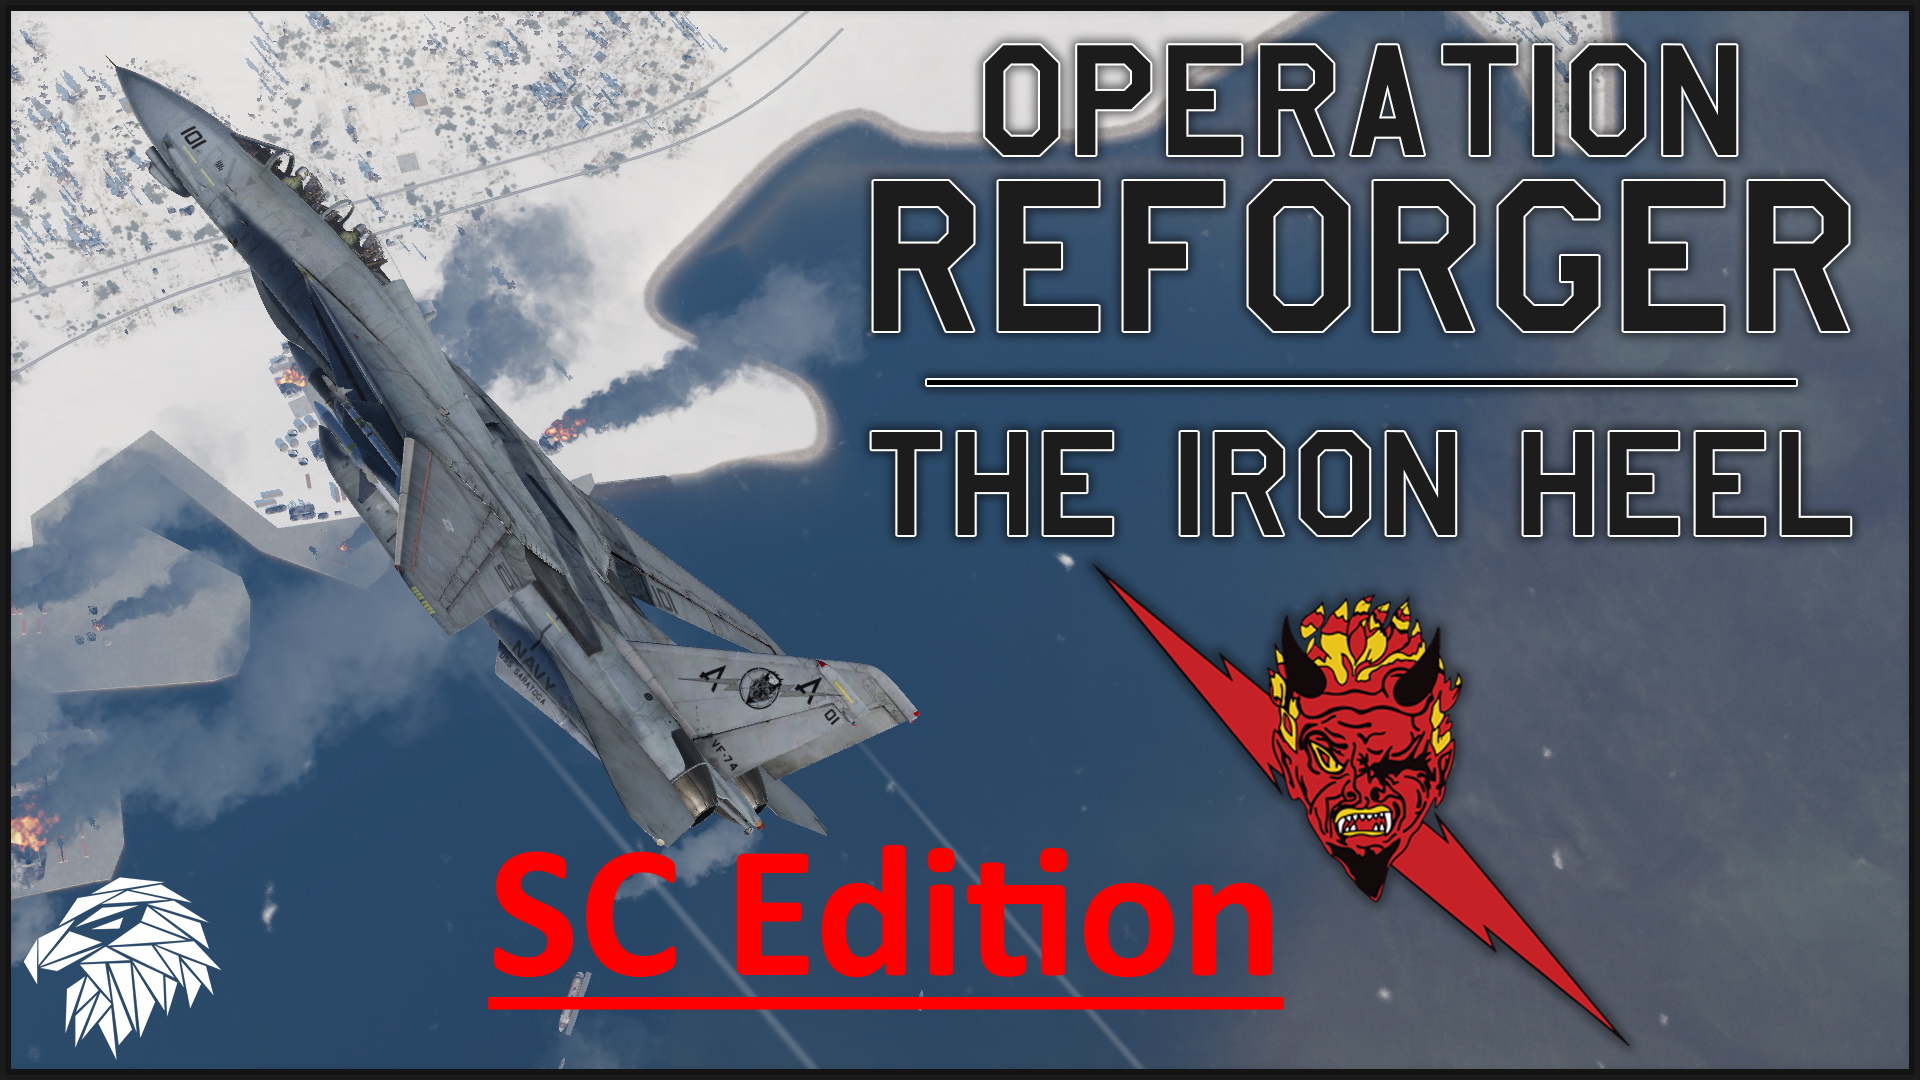  F-14B Campaign | Operation Reforger - The Iron Heel  (Super Carrier eddition) 